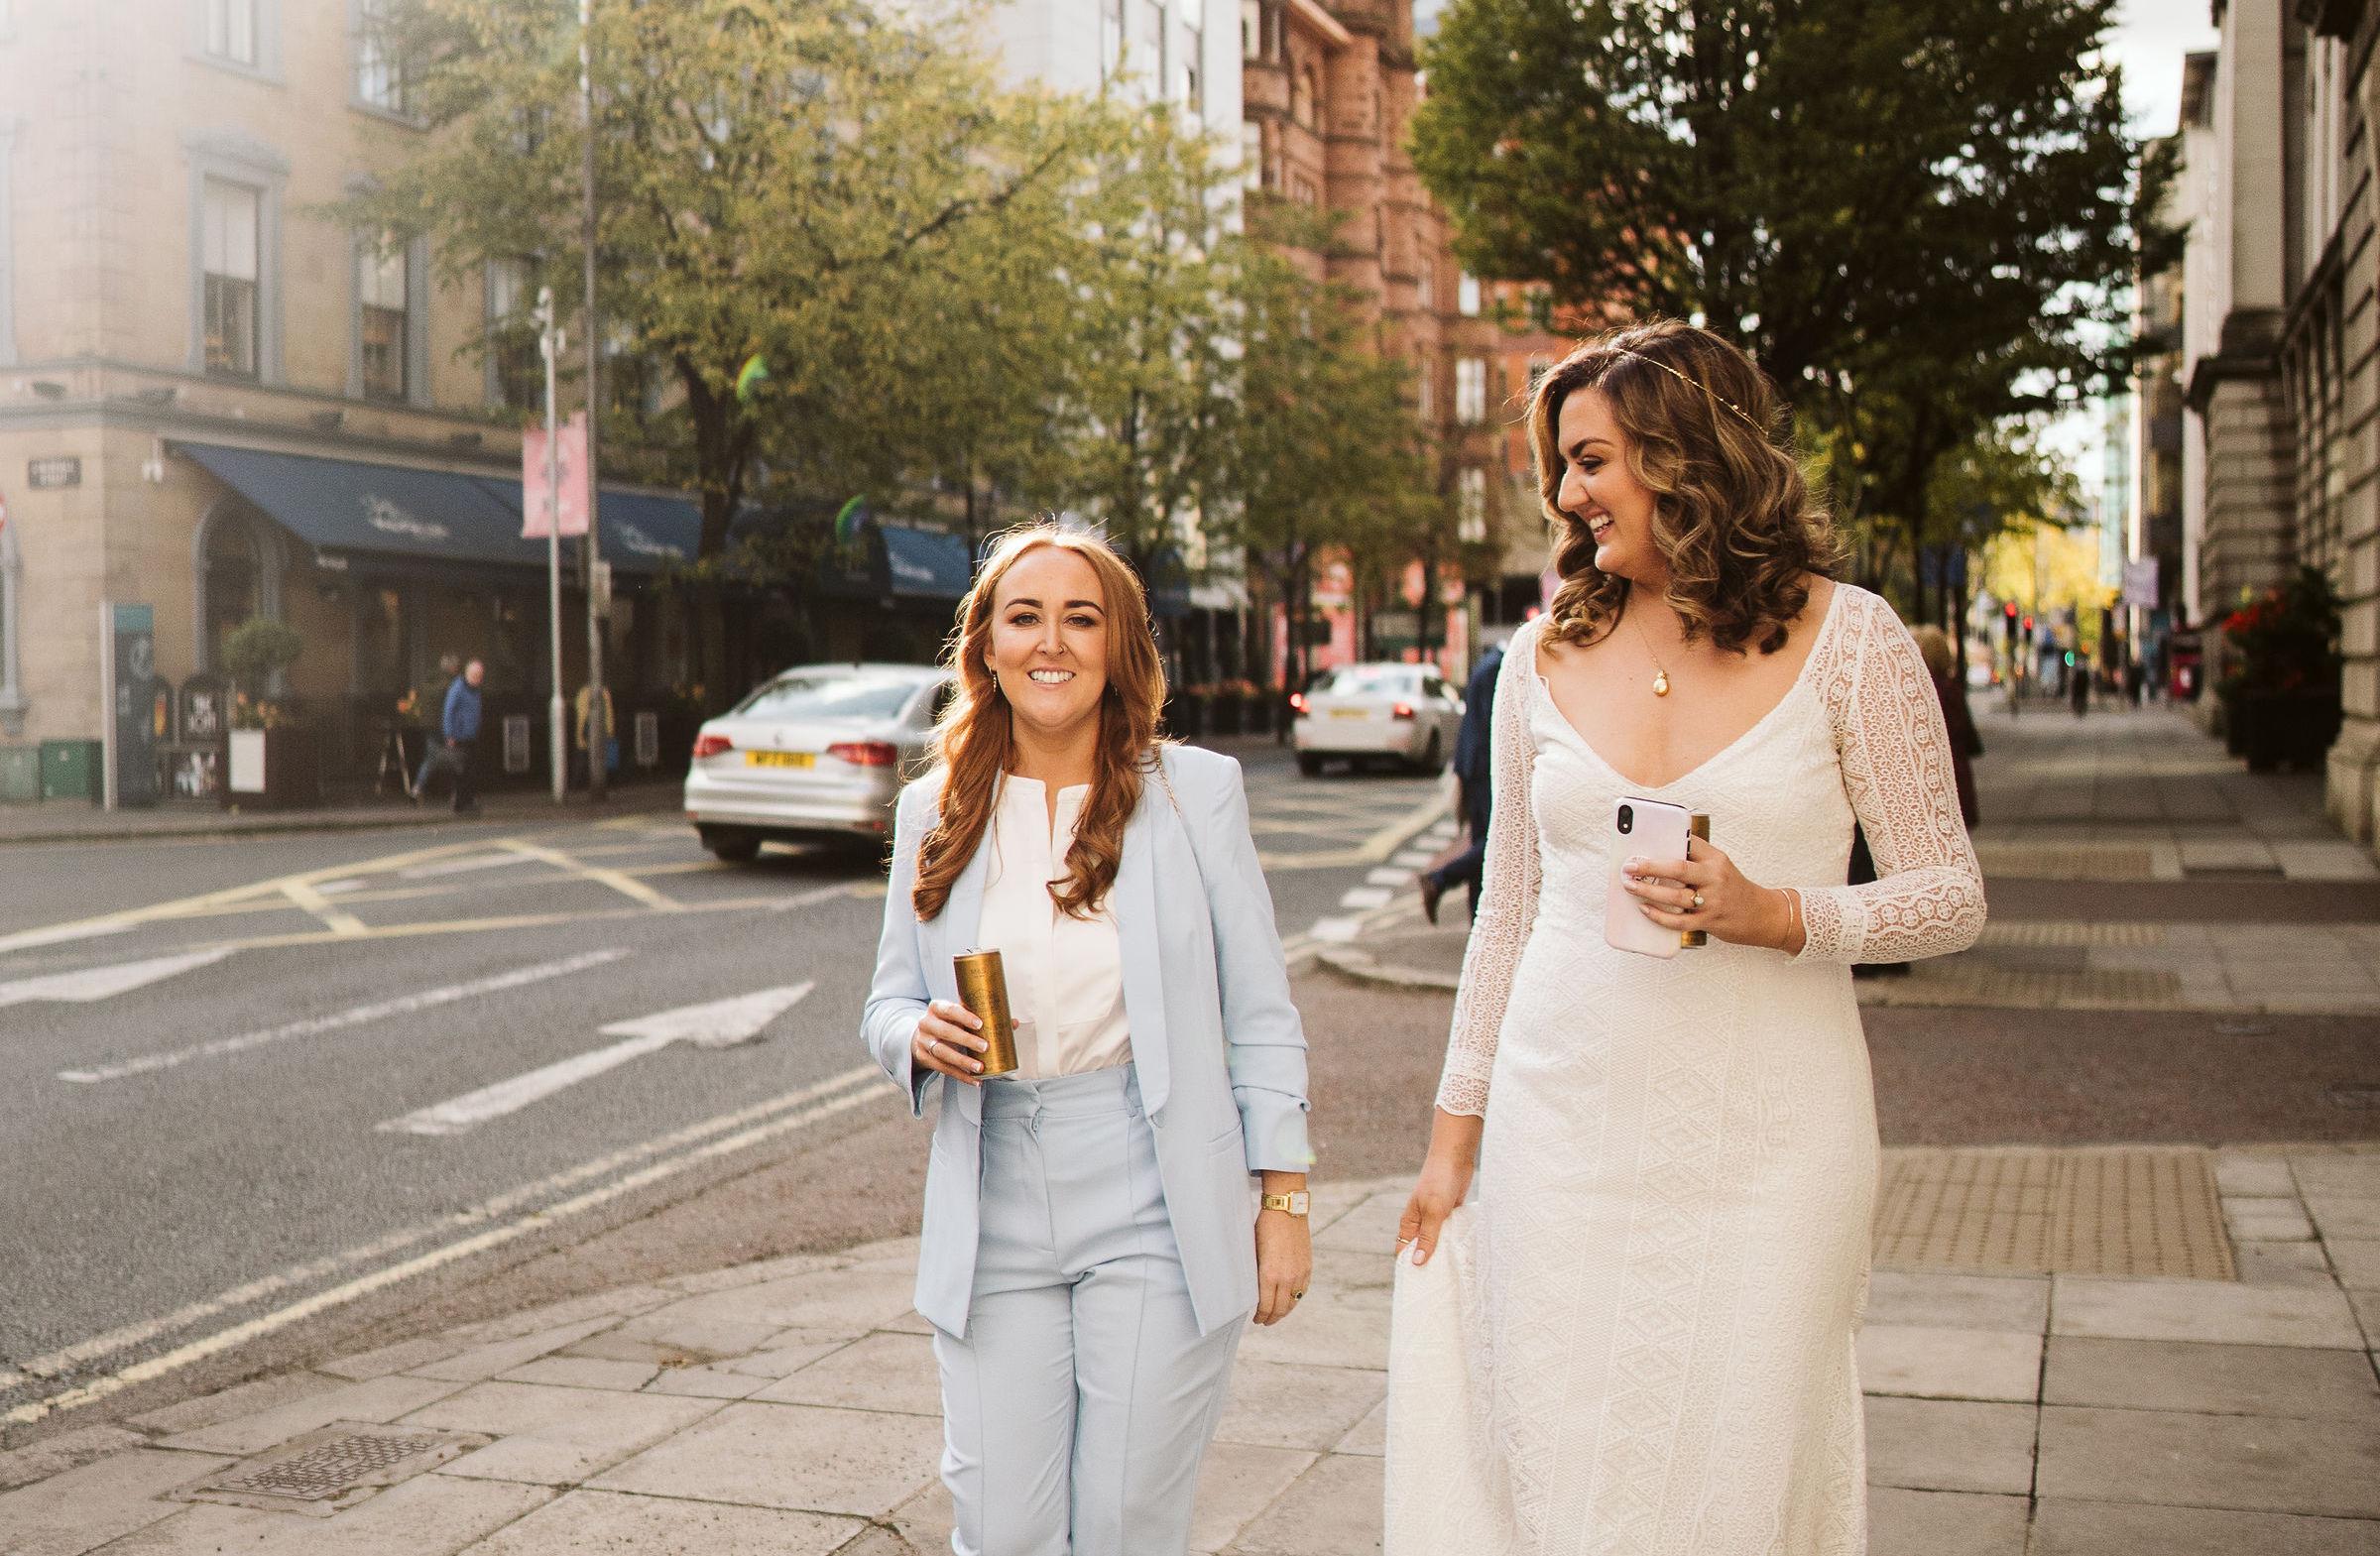 Connie and Aoife Grew Up in the Same Northern Irish Town, But Found Each Other on Bumble